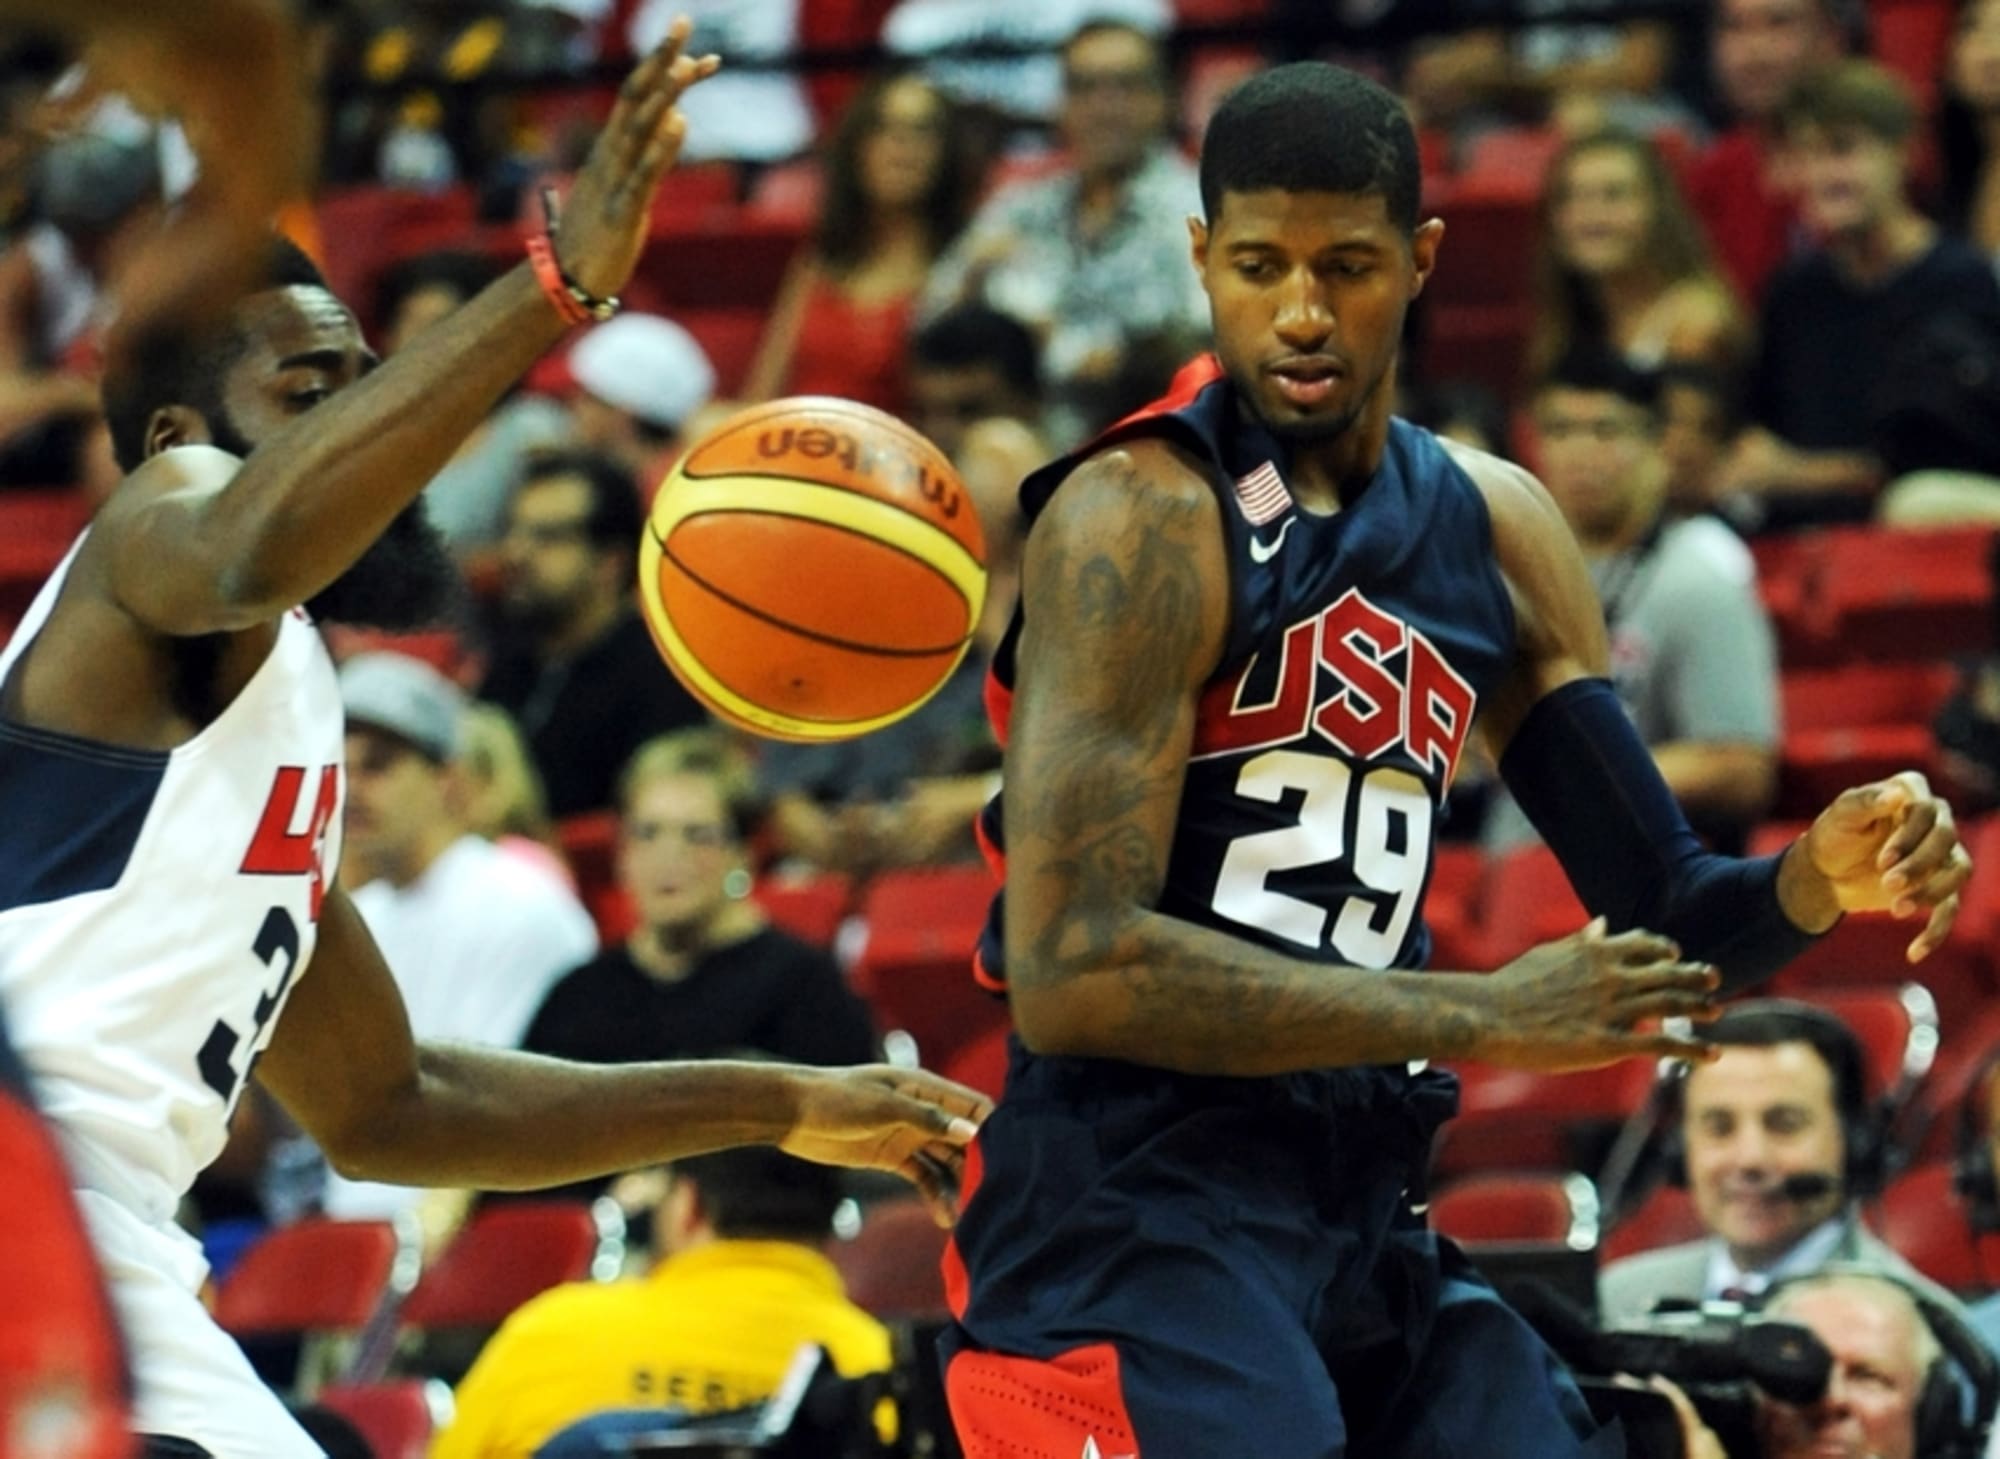 GRAPHIC VIDEO: Paul George Suffered a Horrific Leg Injury During a Team USA  Scrimmage